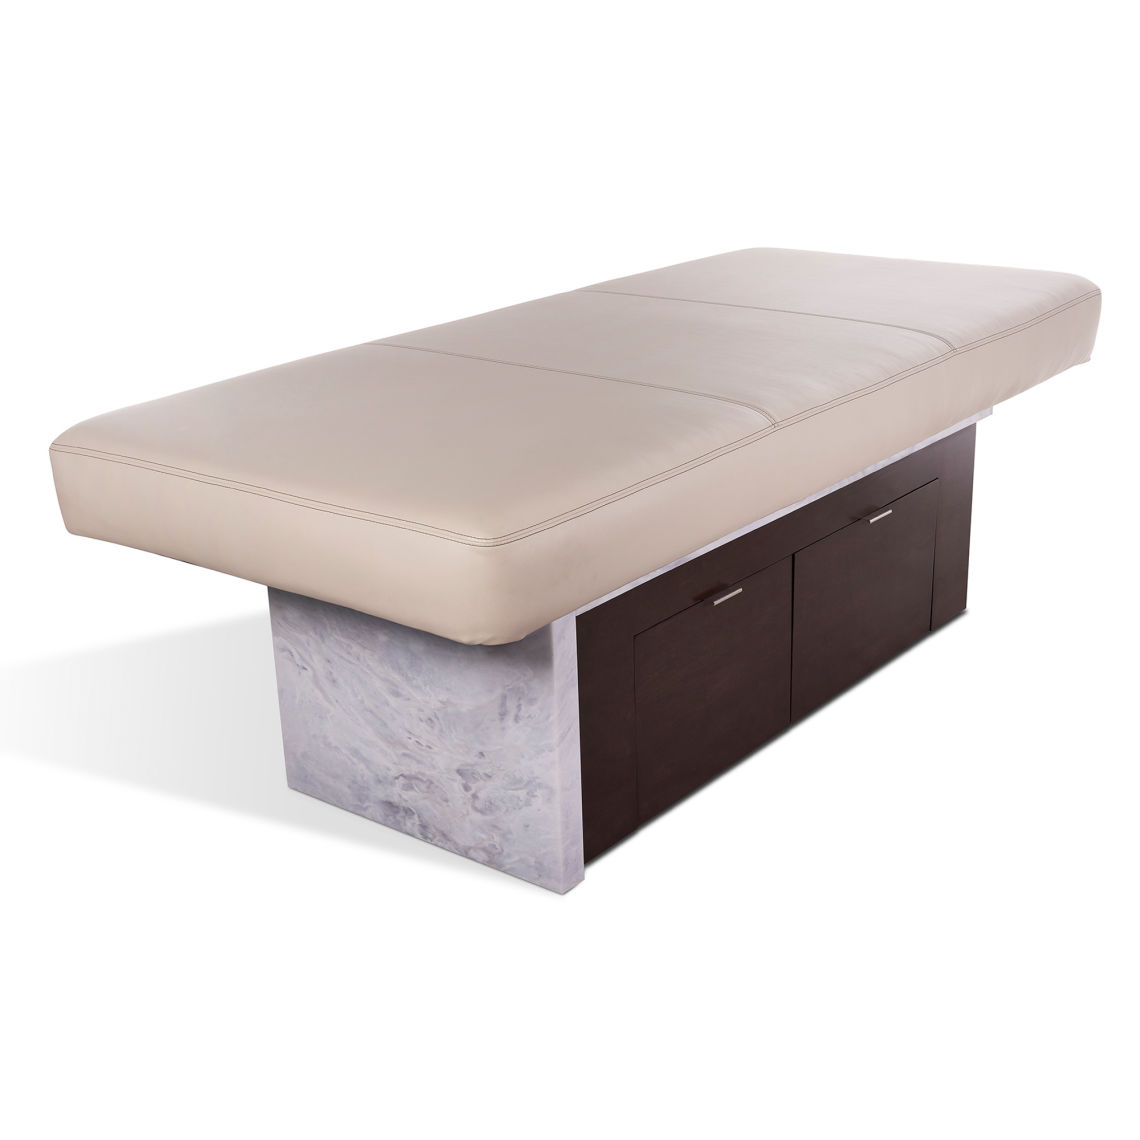 Spavision | Insignia Waterfall™ Multi-purpose treatment table with replaceable mattress